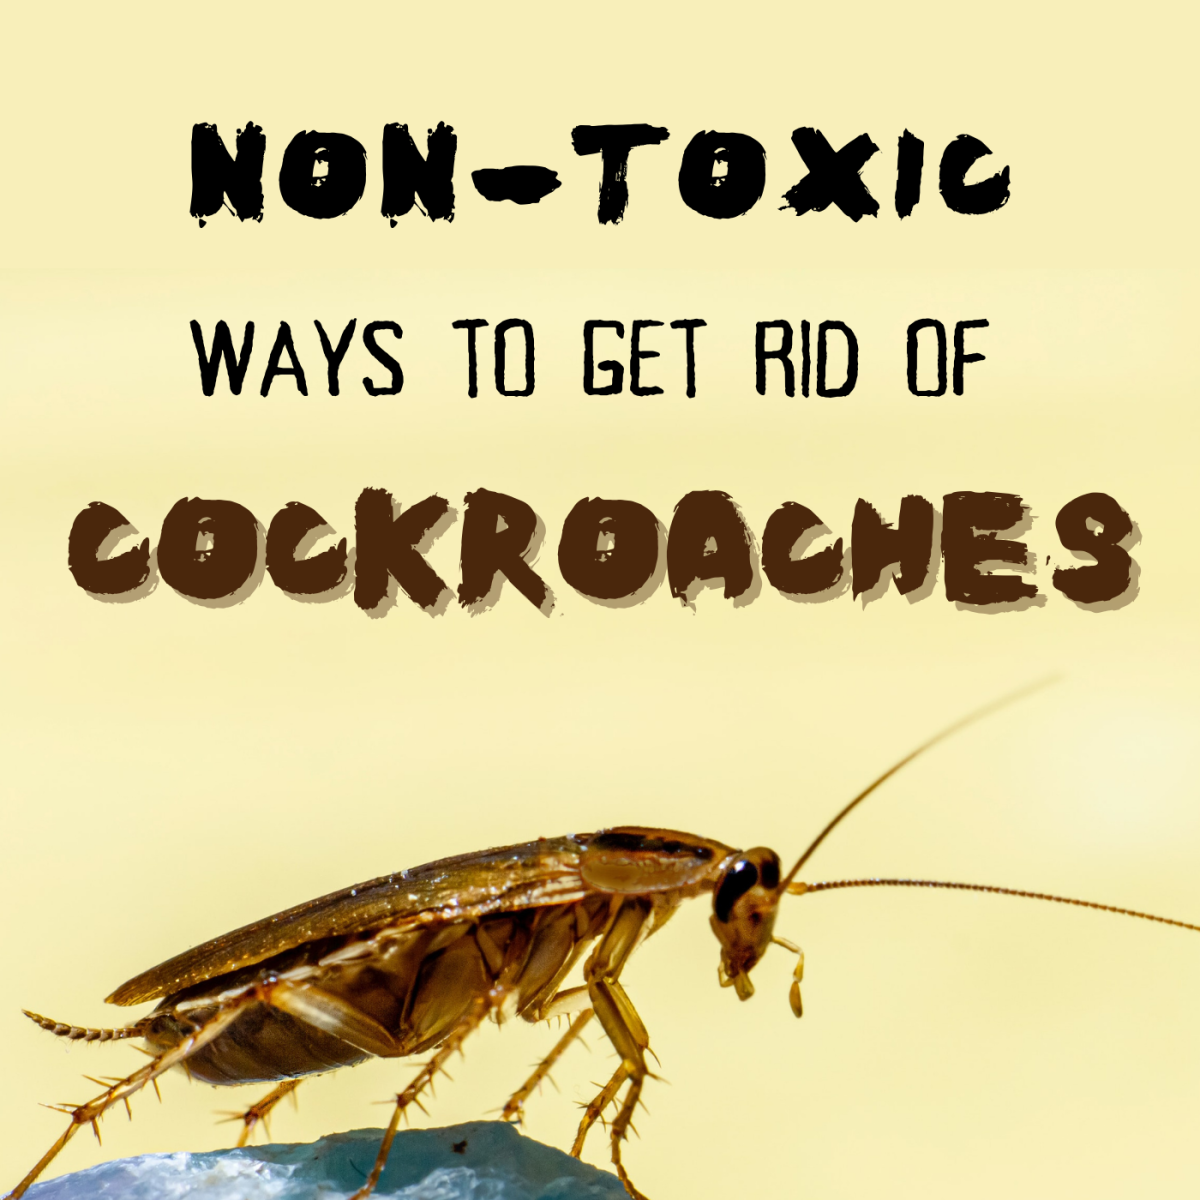 10 ways to safely get rid of cockroaches